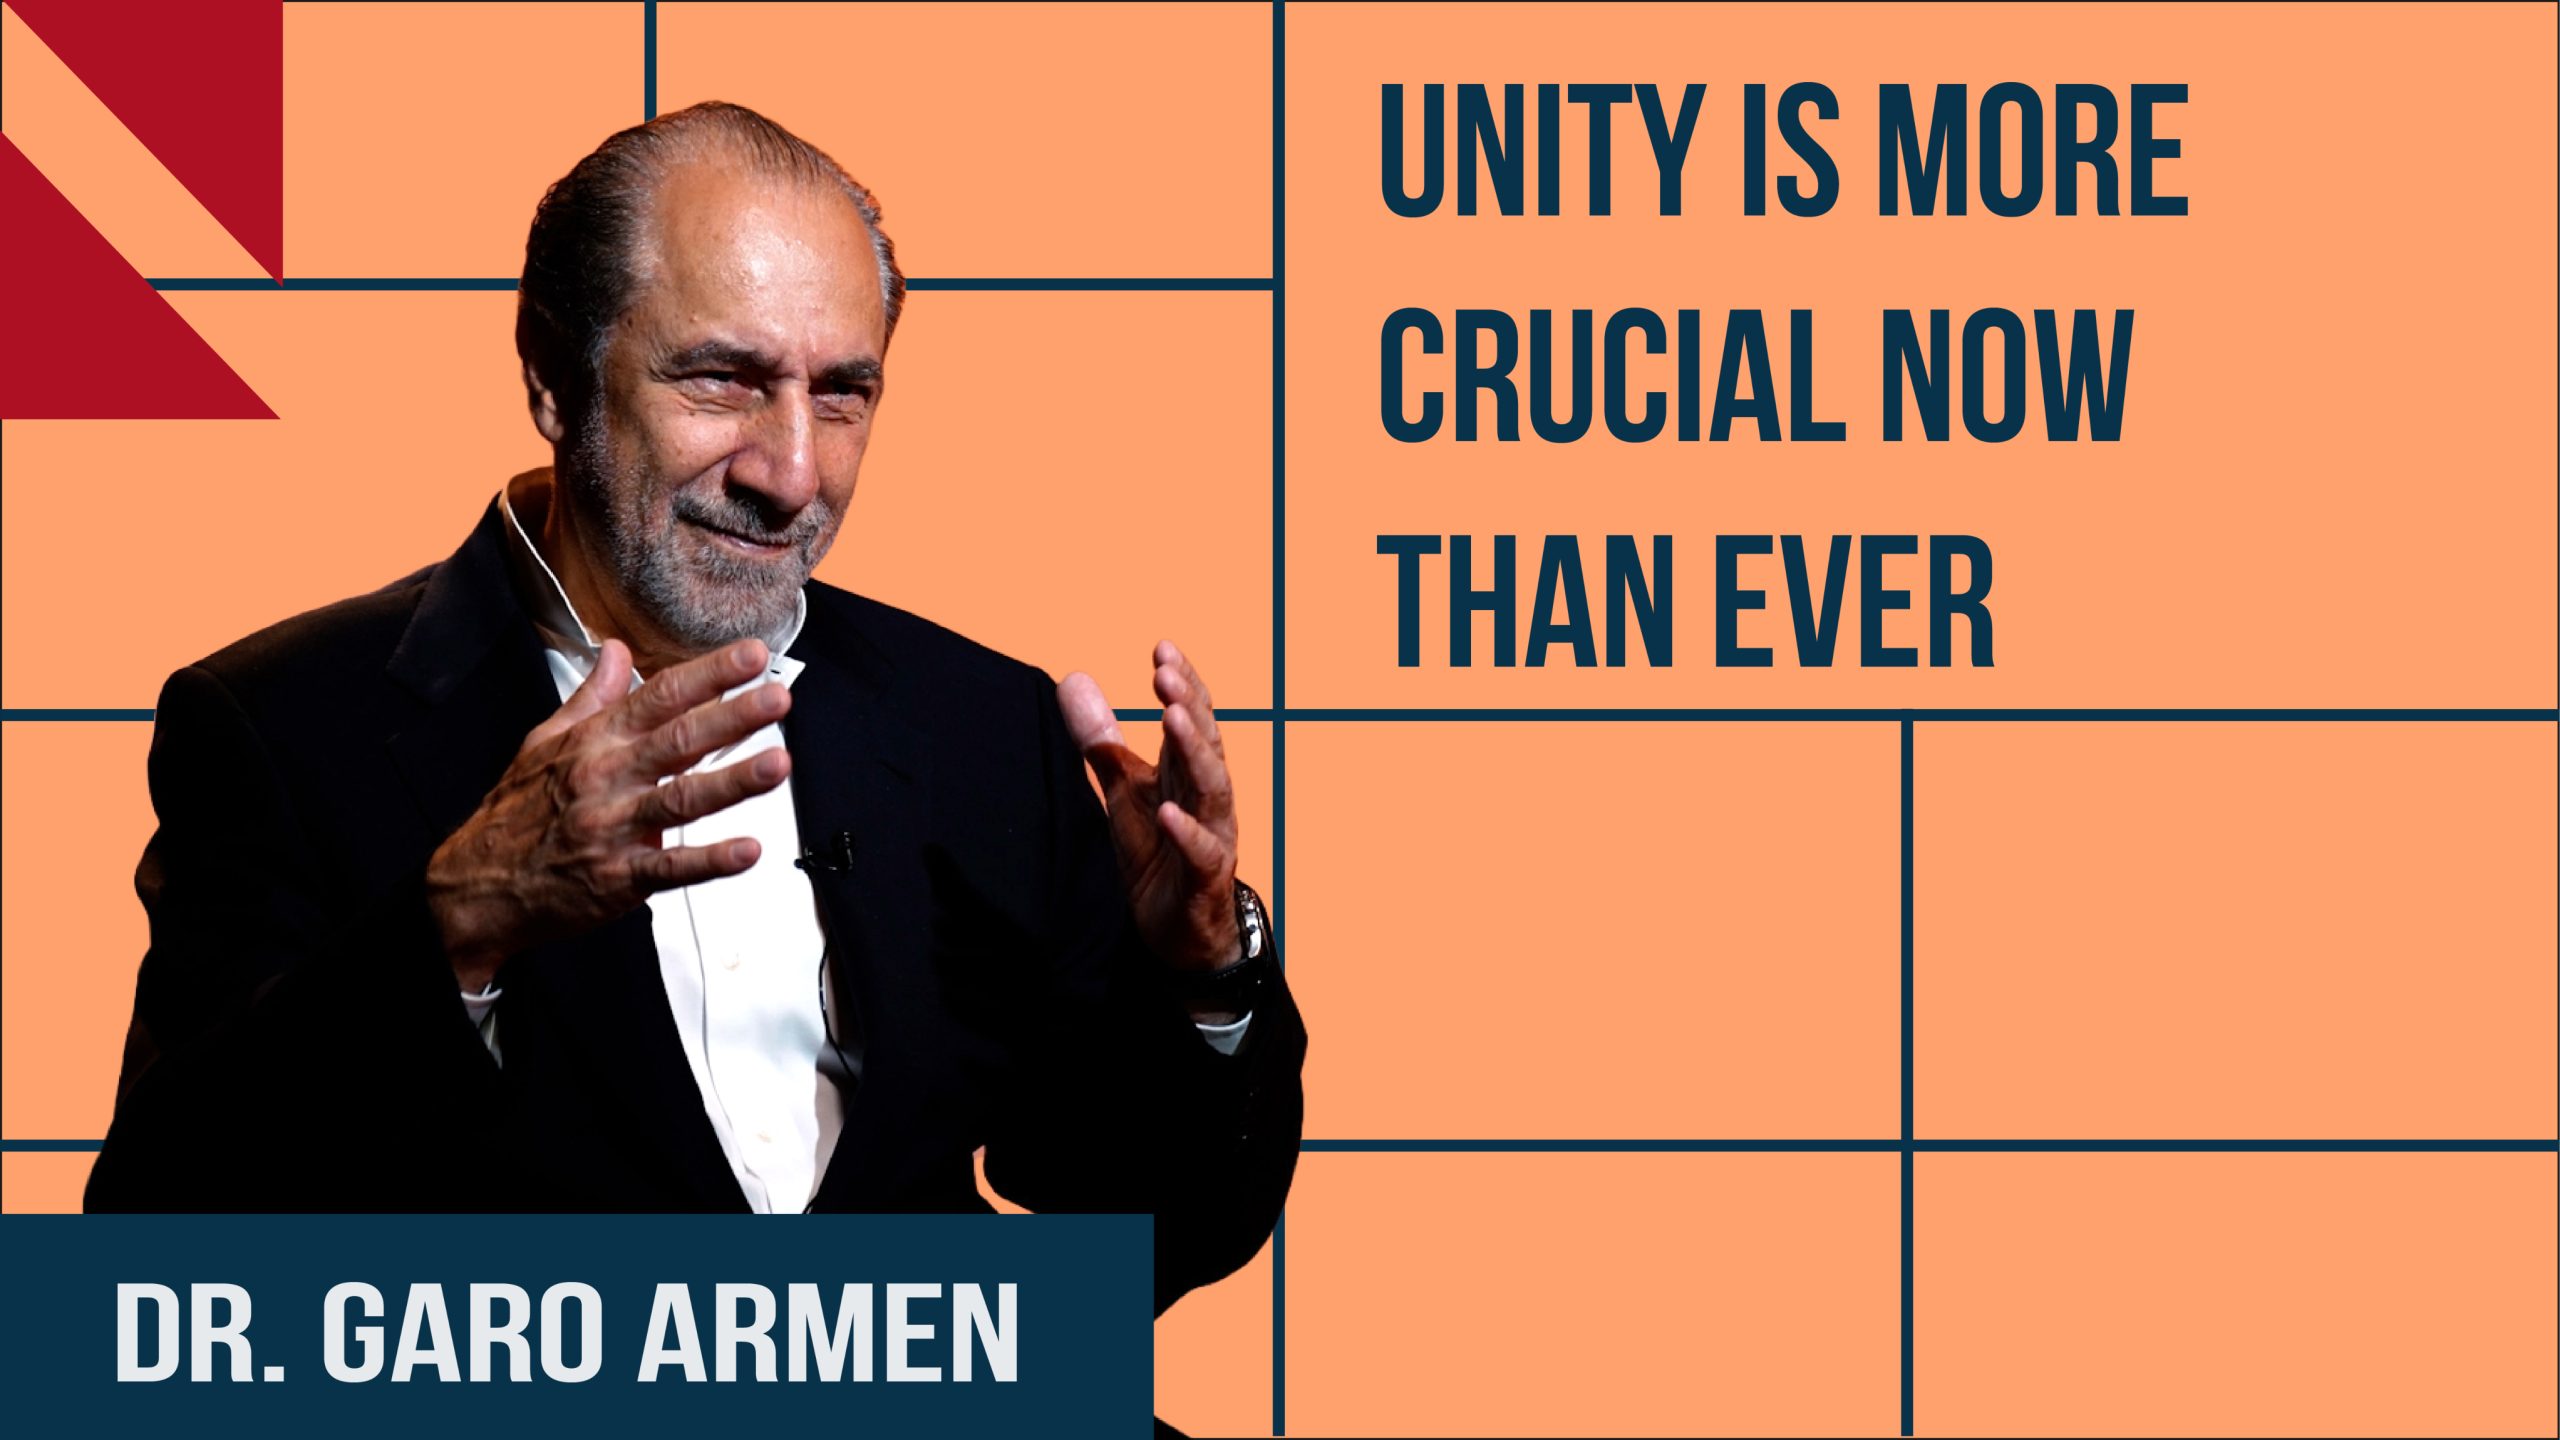 “We owe it to our ancestors and future generations to regroup and rebuild”, Dr. Garo Armen